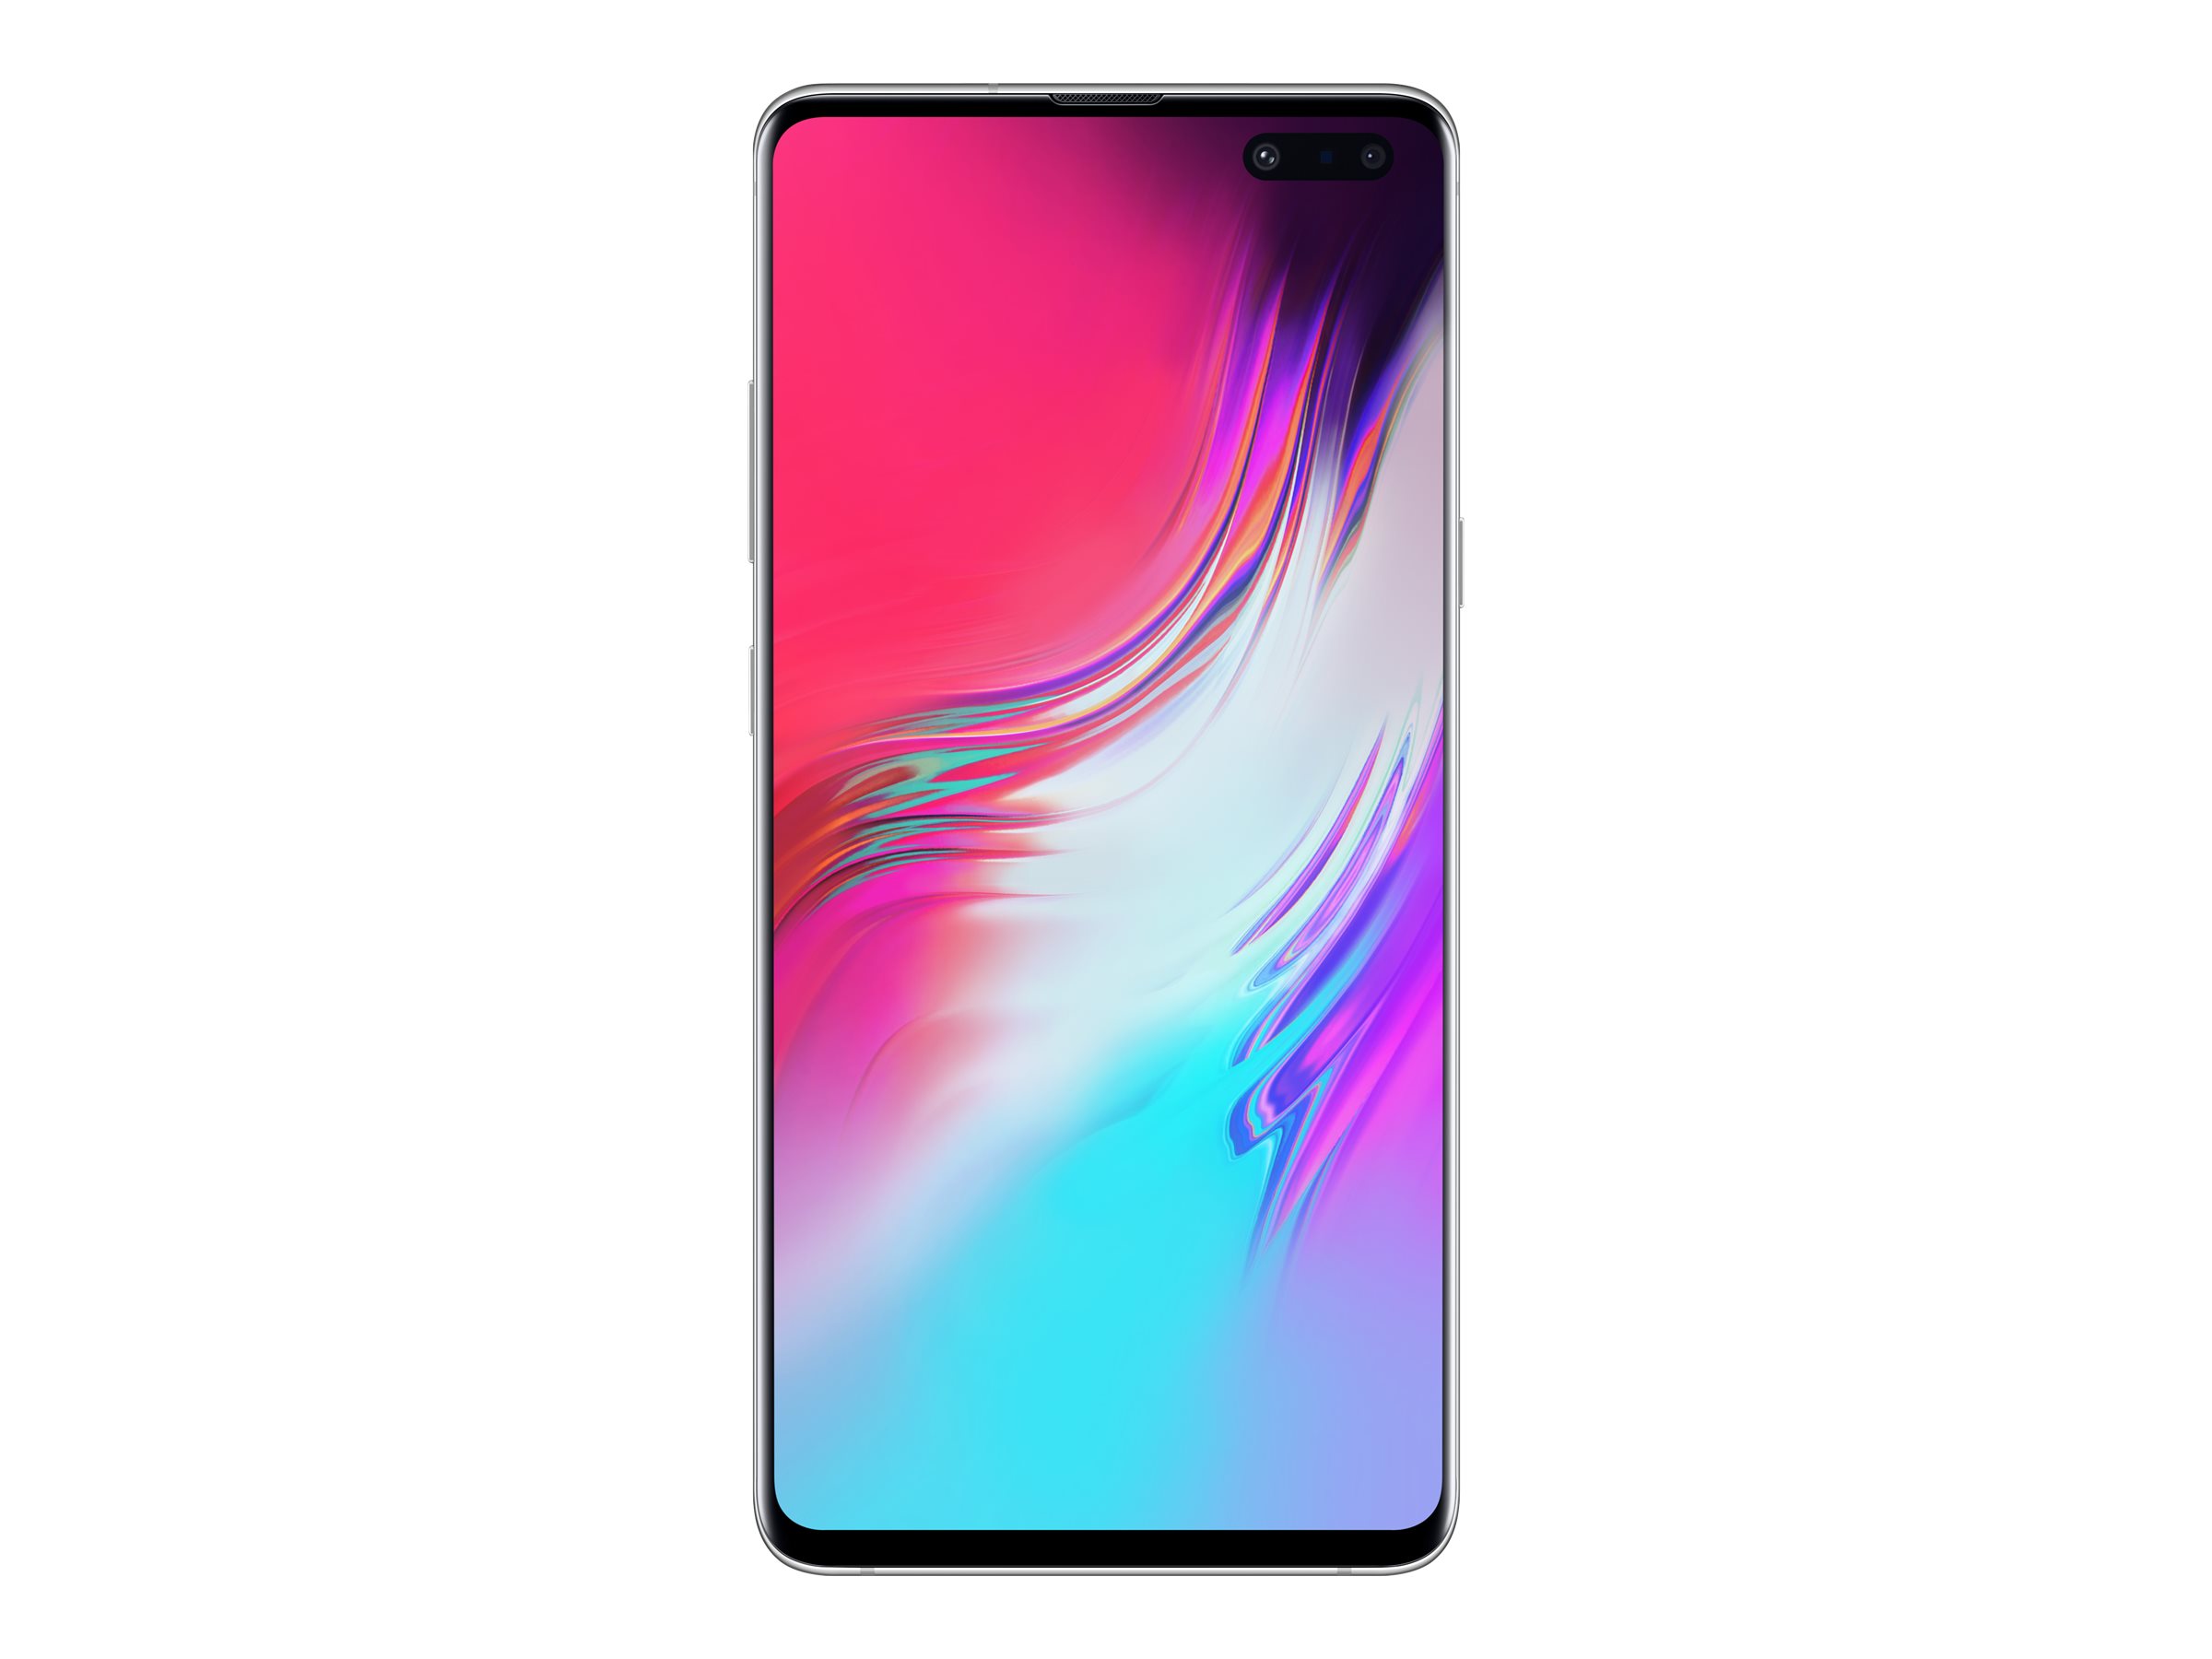 Samsung Galaxy S10 5G: Everything you need to know